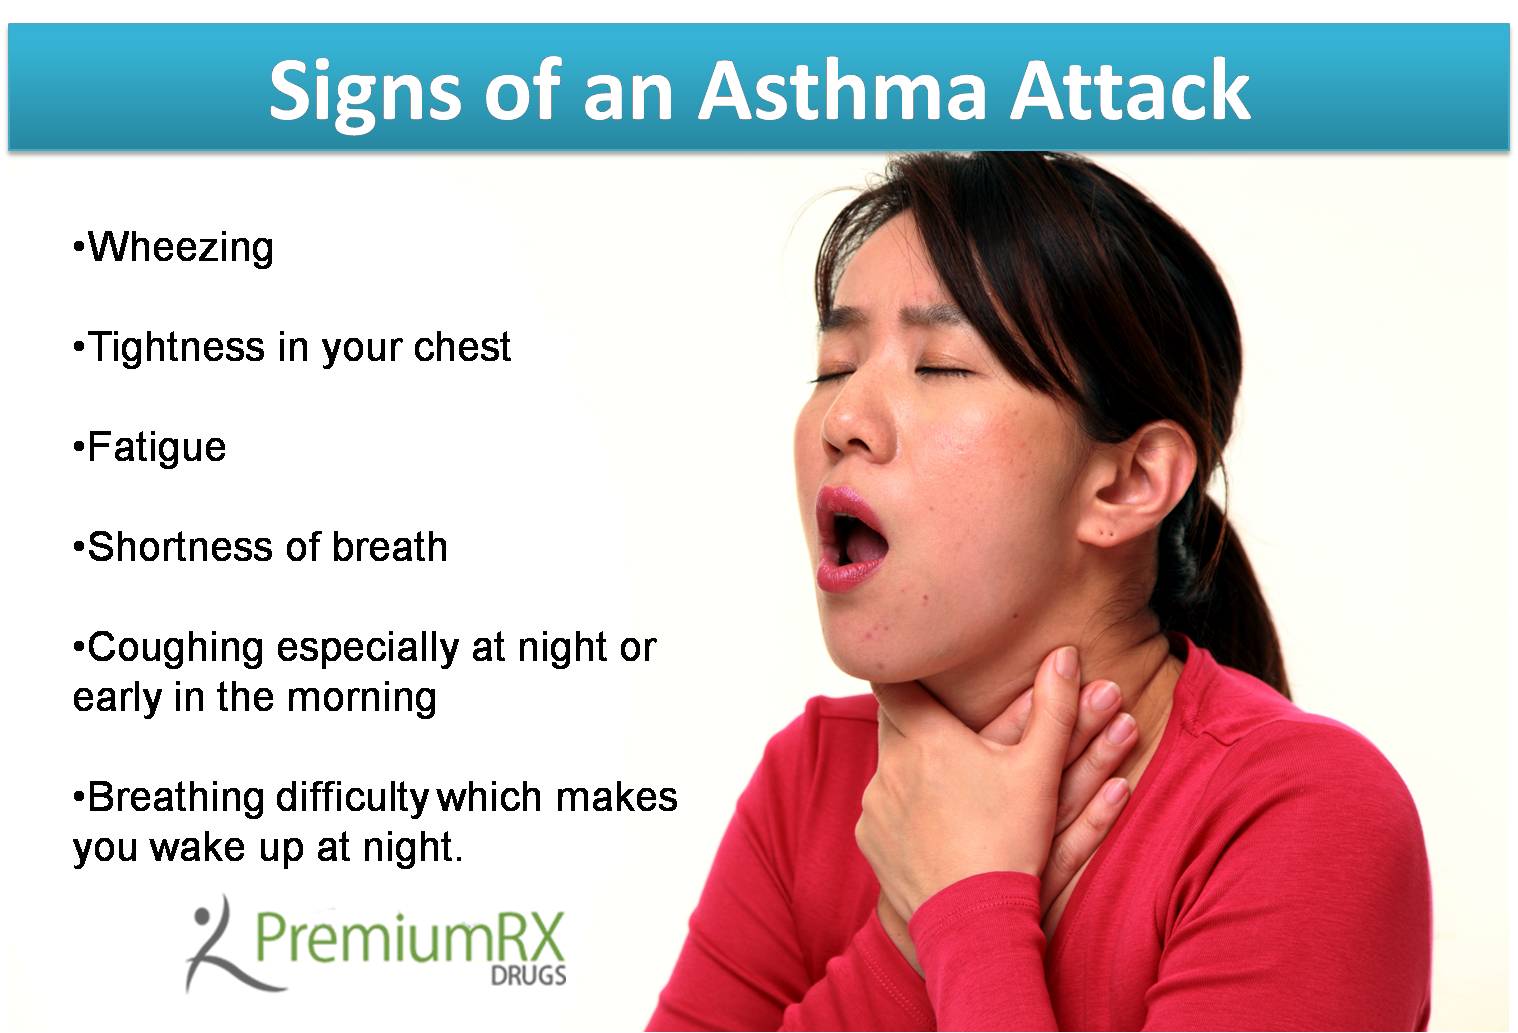 Signs of an Asthma Attack